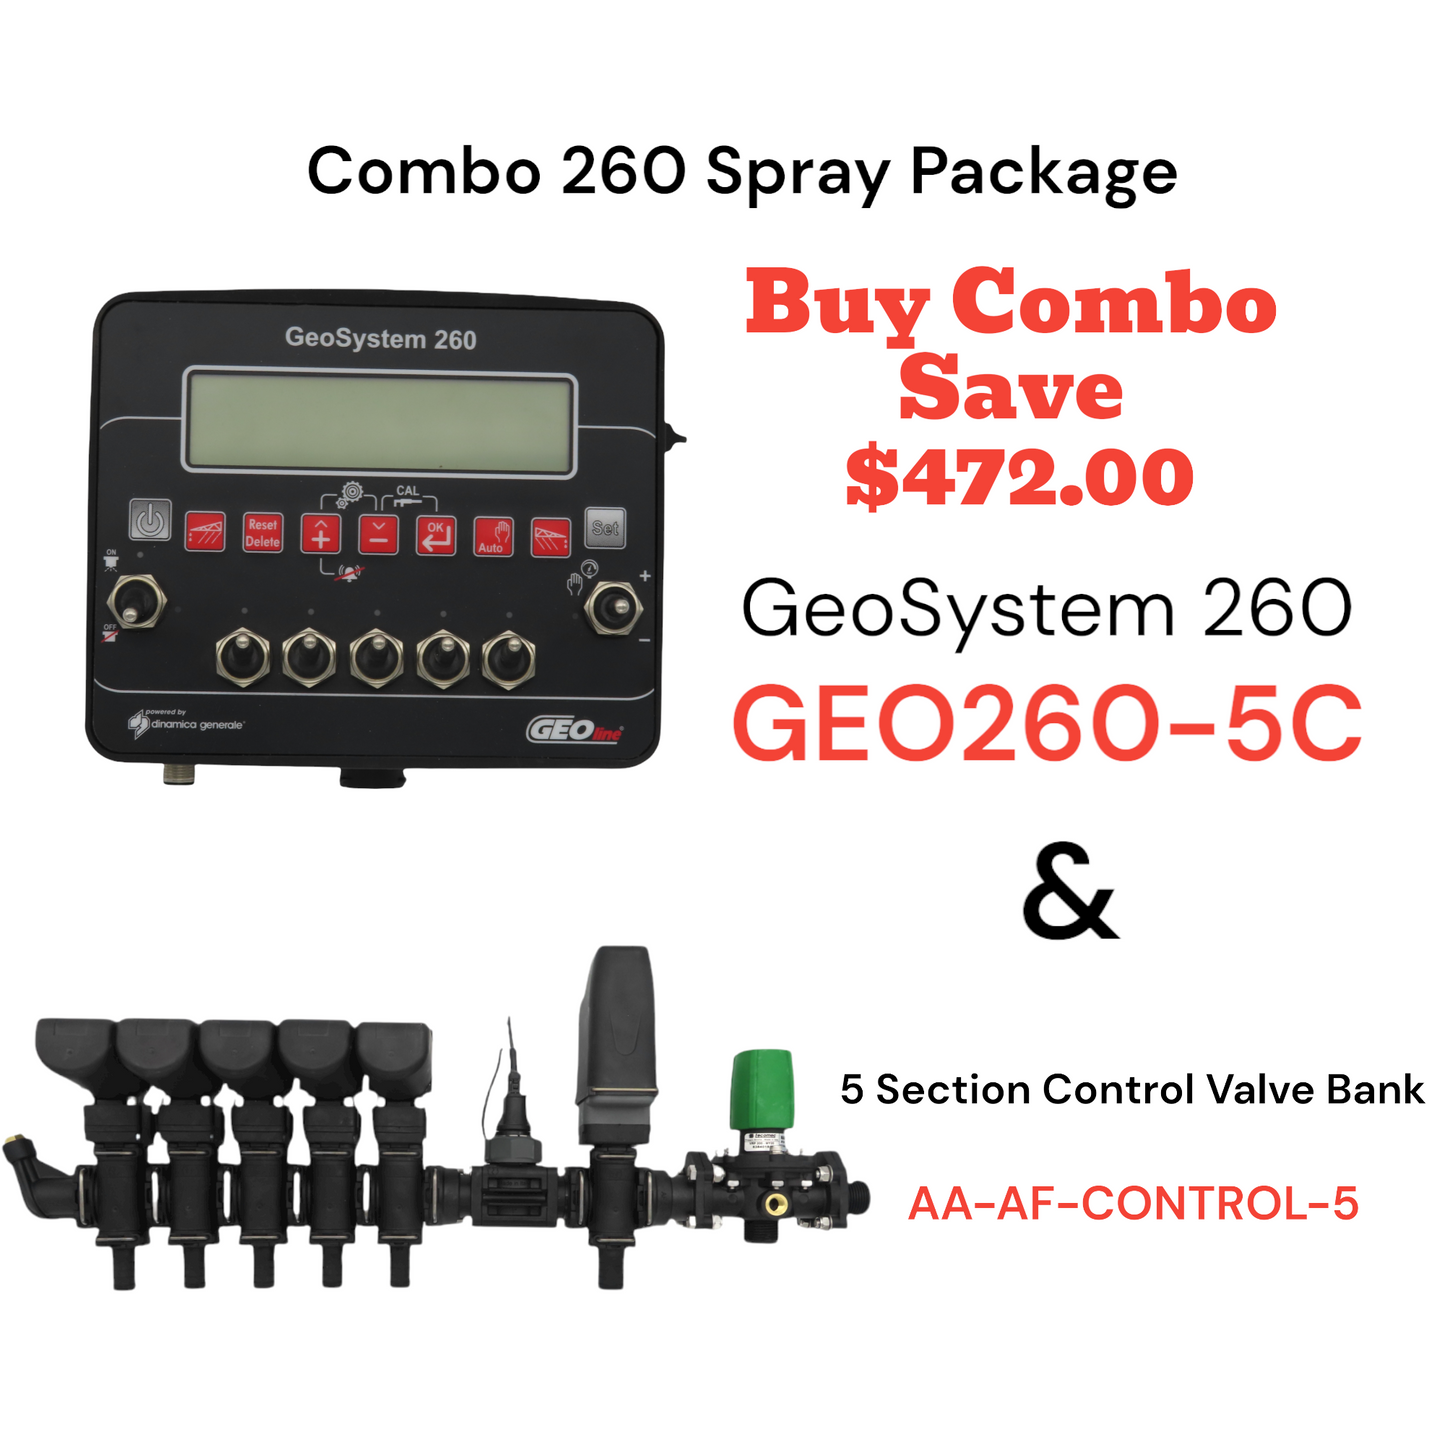 Combo 260 Spray Package - GeoSystem 260 & 5 Section Control Valve Bank